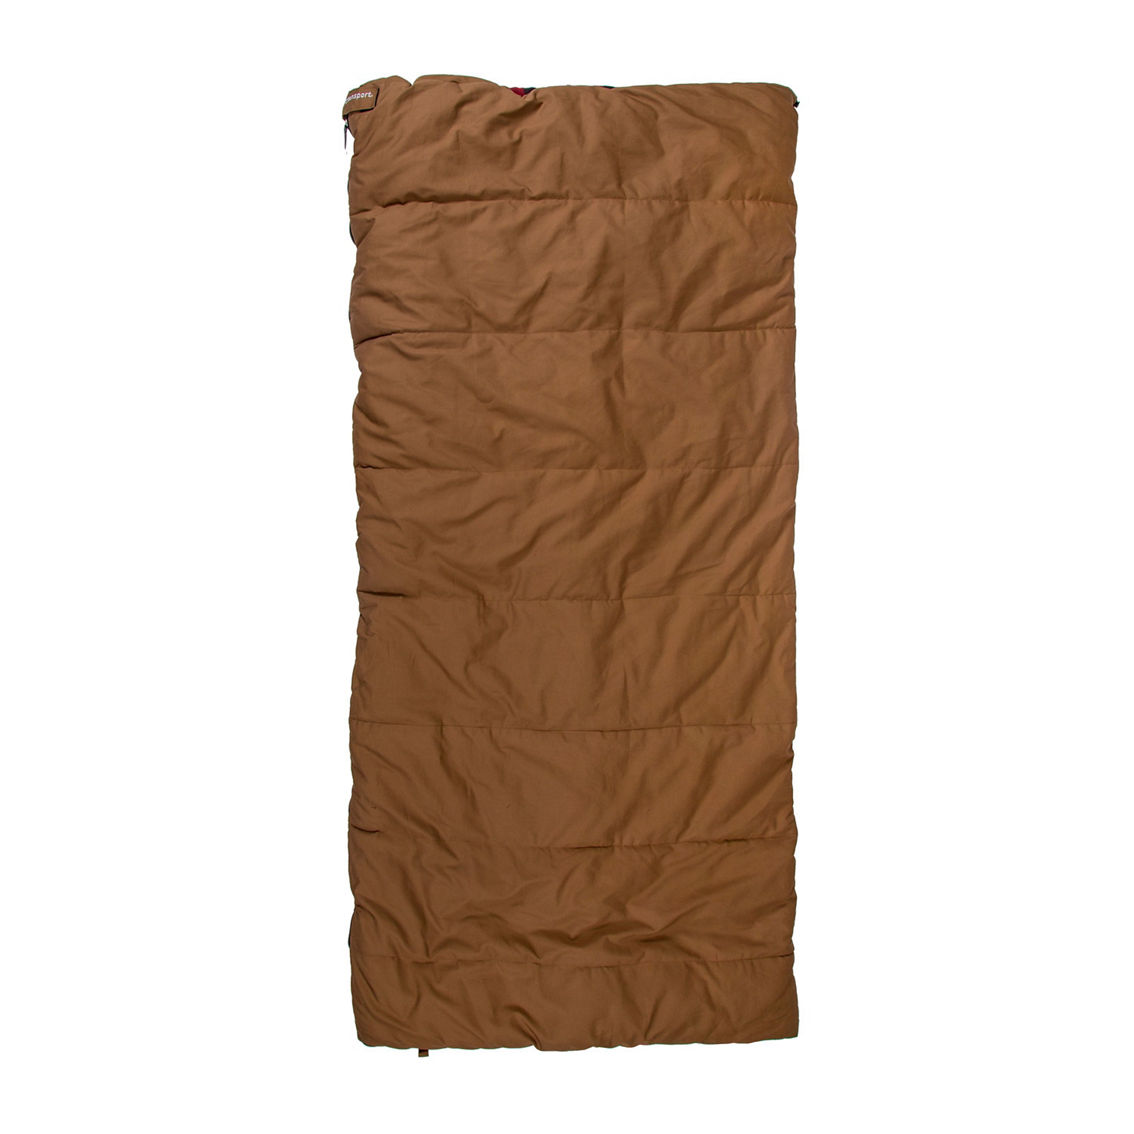 Stansport 6 lbs. Grizzly Sleeping Bag - Image 3 of 5